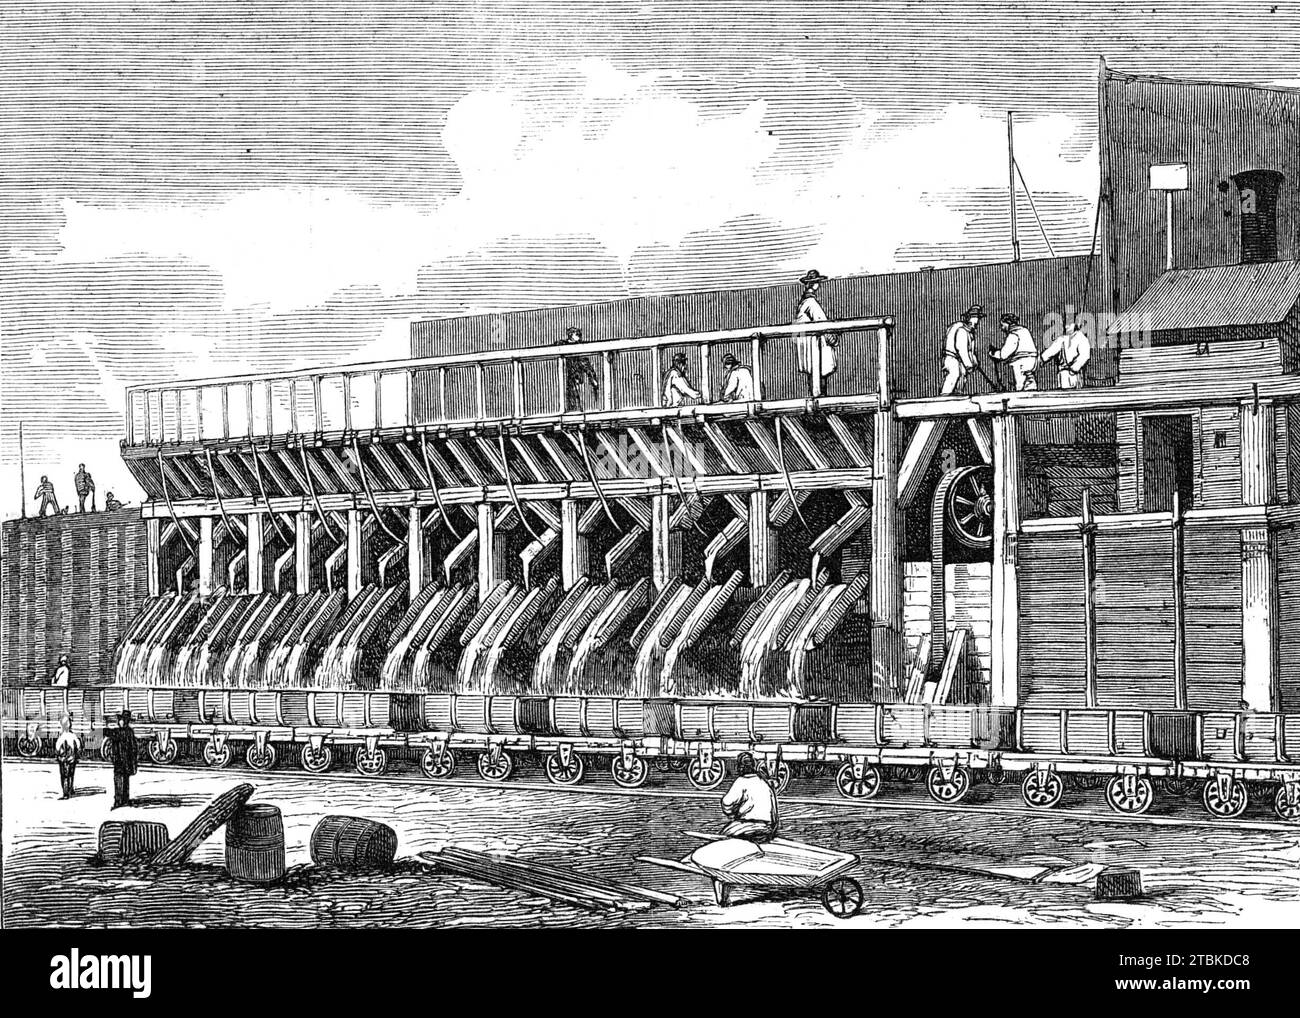 London Main Drainage: the Concrete Mills at Plaistow, 1861. During the early 19th century the River Thames was an open sewer, with disastrous consequences for public health in London, including cholera epidemics. Proposals to modernise the sewerage system had been made in the early 1700s but the costs of such a project deterred progress. However, after the Great Stink of 1858, Parliament realised the urgency of the problem and resolved to create a modern sewerage system. View of concrete manufactory making Portland cement for tunnel-building. Railway wagons carry the cement to the various cons Stock Photo